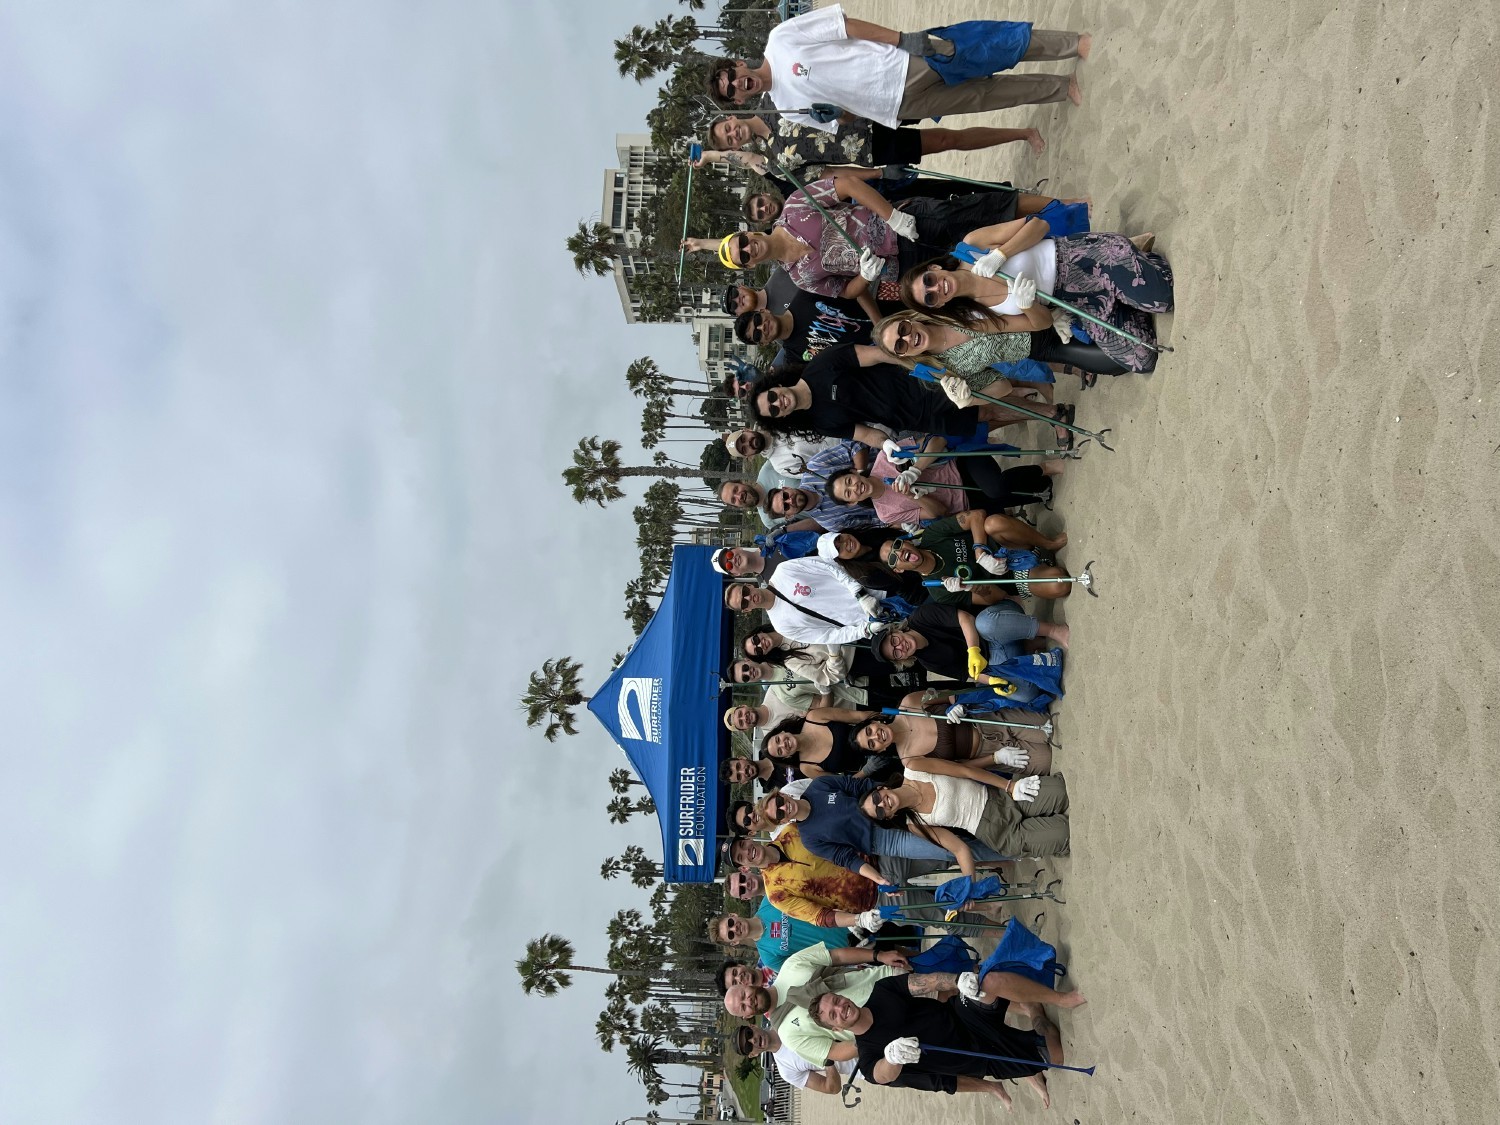 Charity Beach clean up in our LA office